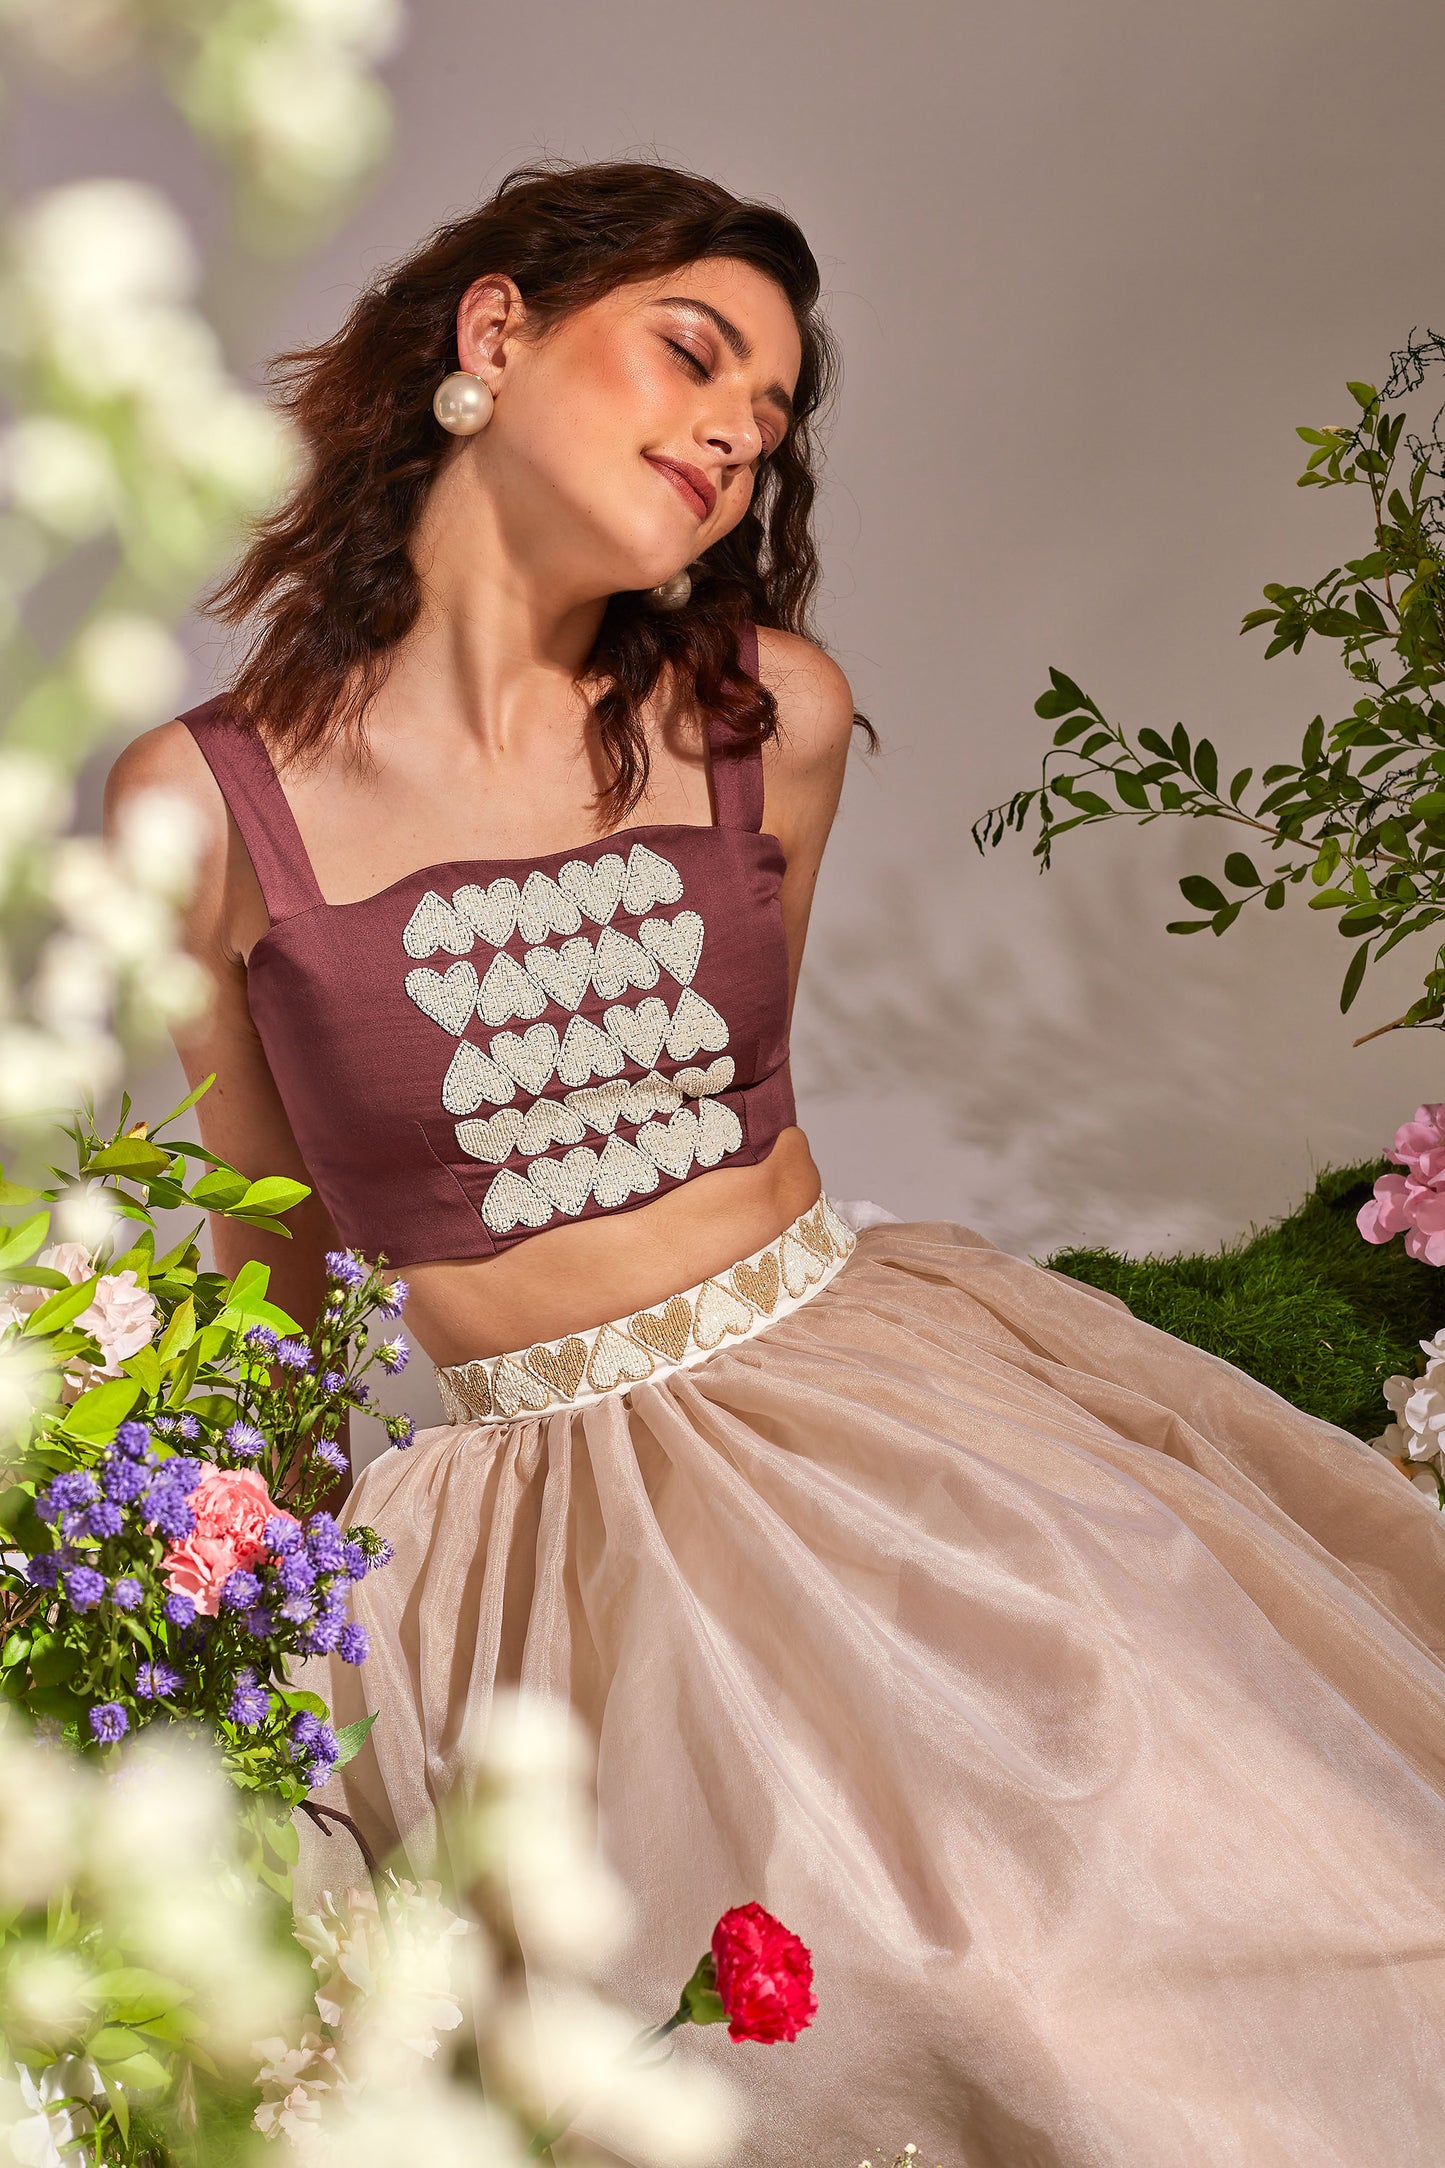 AMOUR  Plum, Beige and White crop top skirt